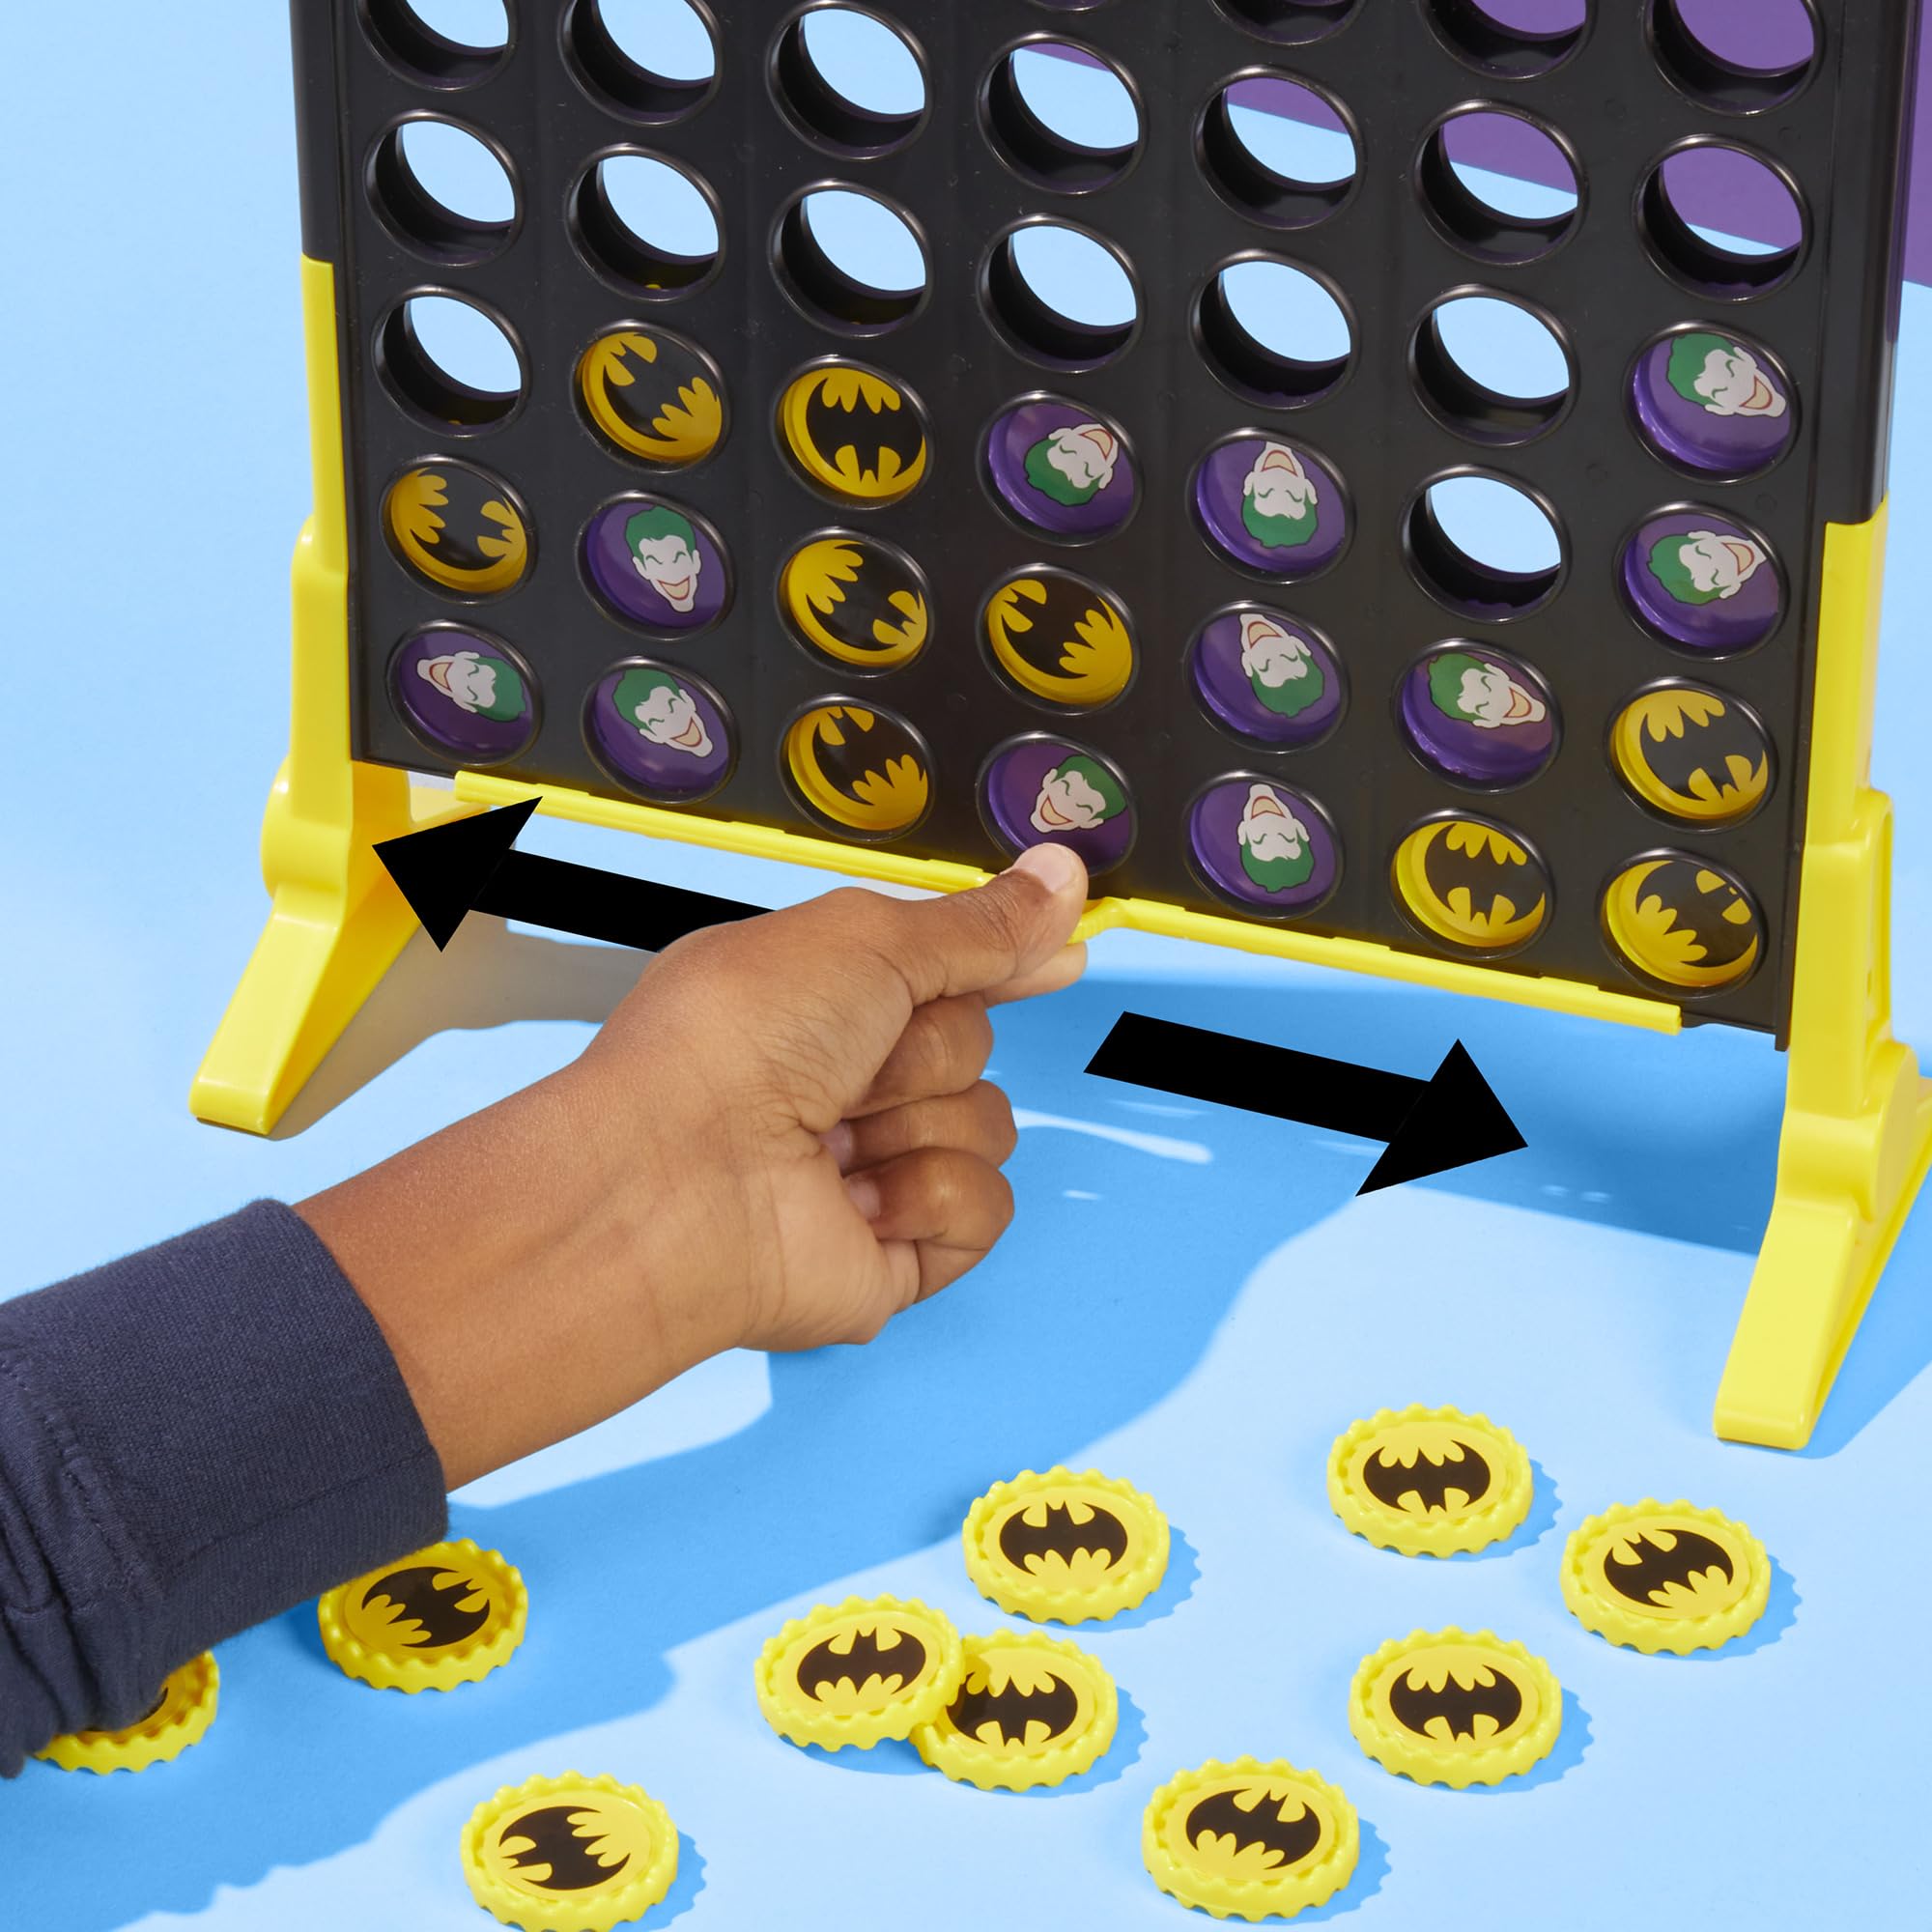 Connect 4 Batman Game | Batman-Themed 4 in a Row Game | Ages 6 and Up| For 2 Players | Strategy Board Games for Kids and Families (Amazon Exclusive)